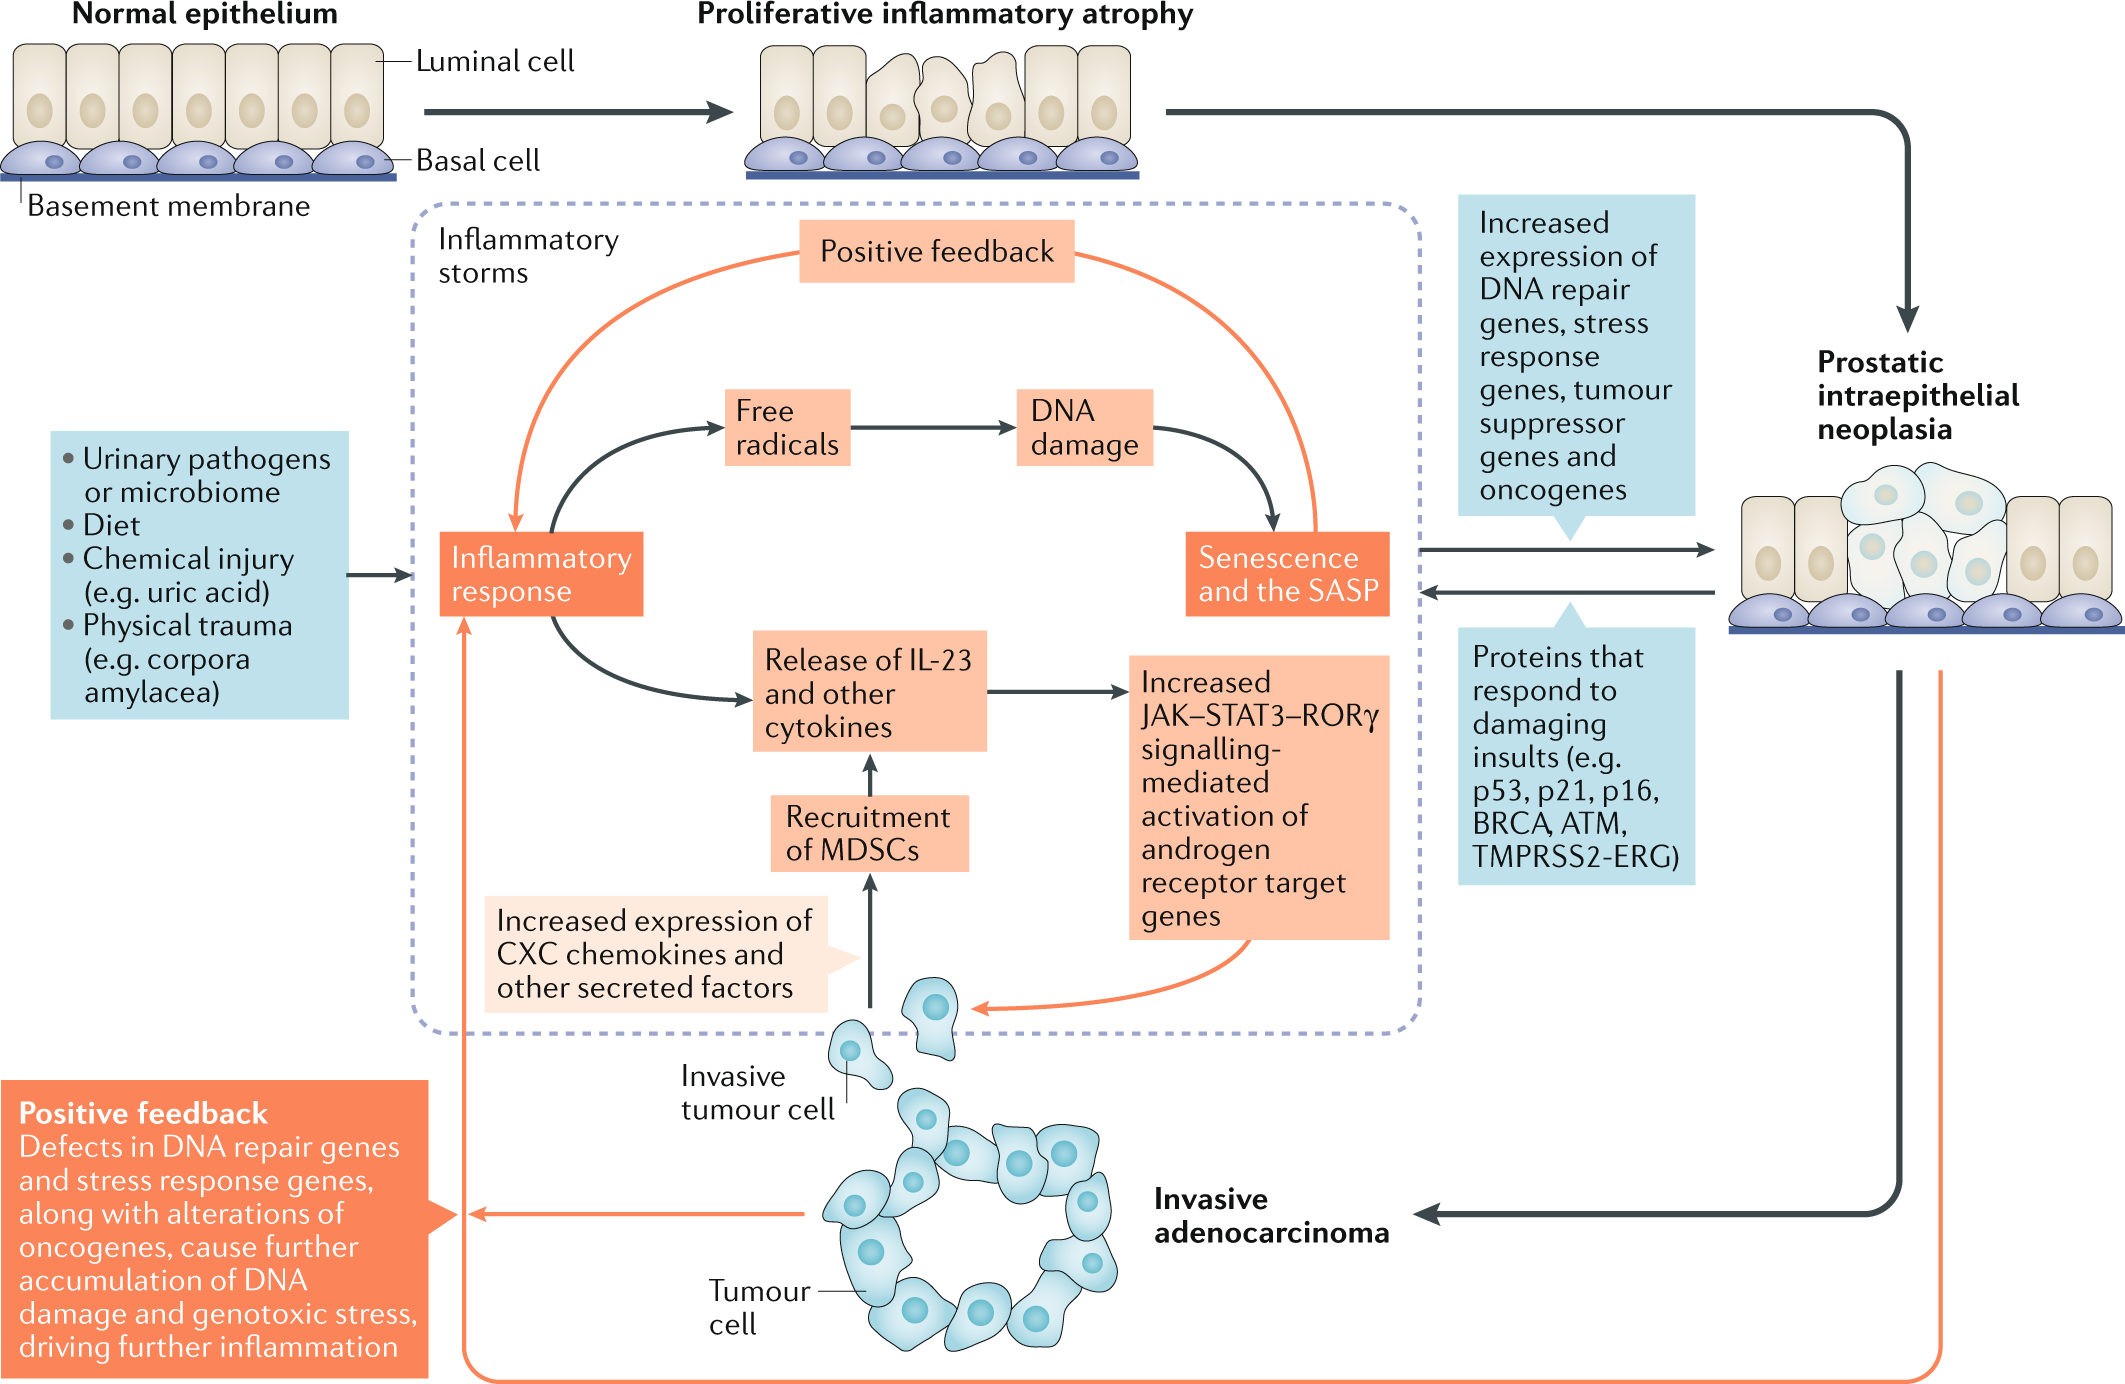 Nature Reviews Cancer - This Review discusses intra-prostatic inflammatory ...